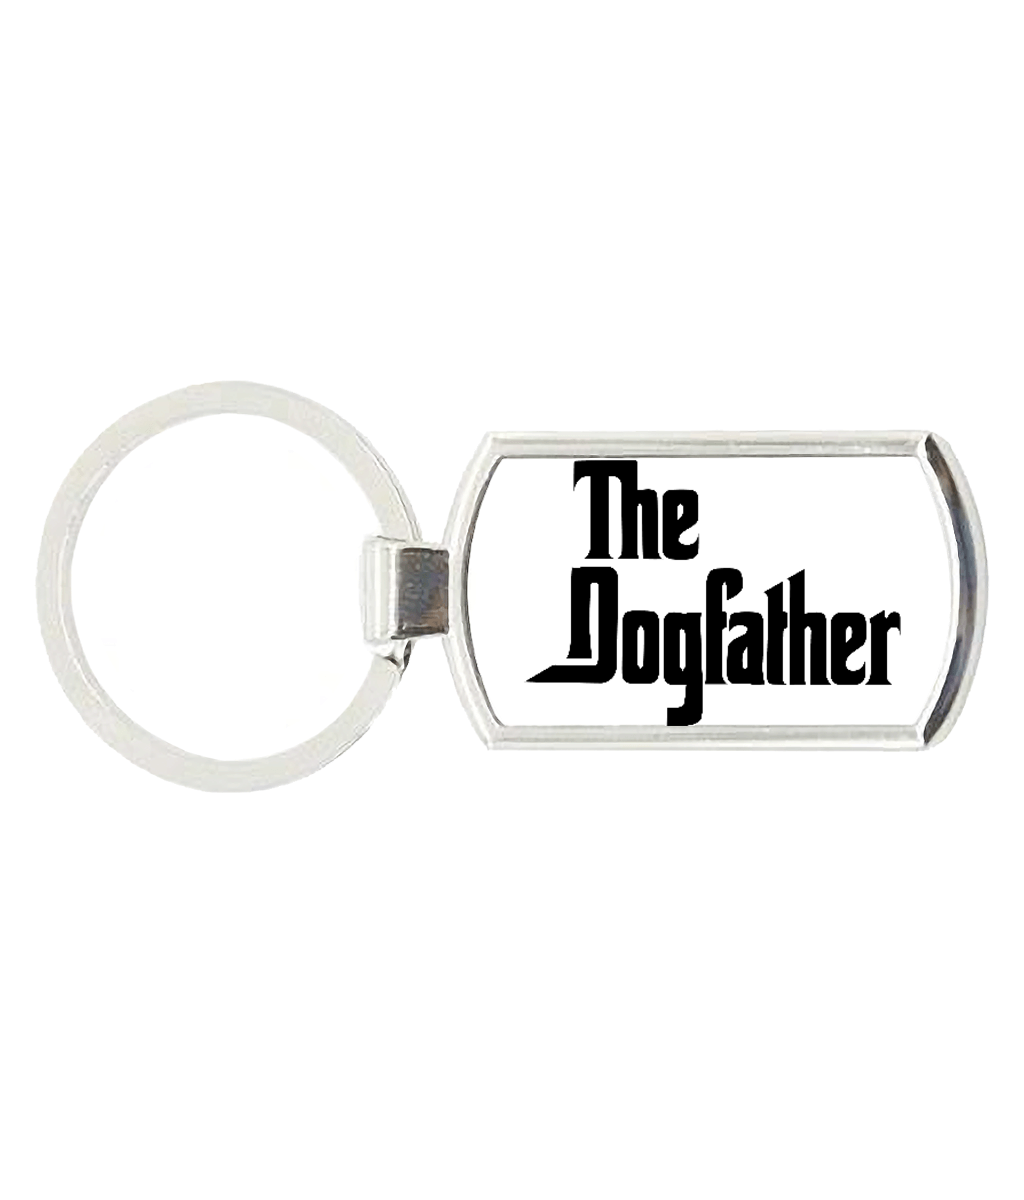 THE DOGFATHER Oblong Metal Keyring